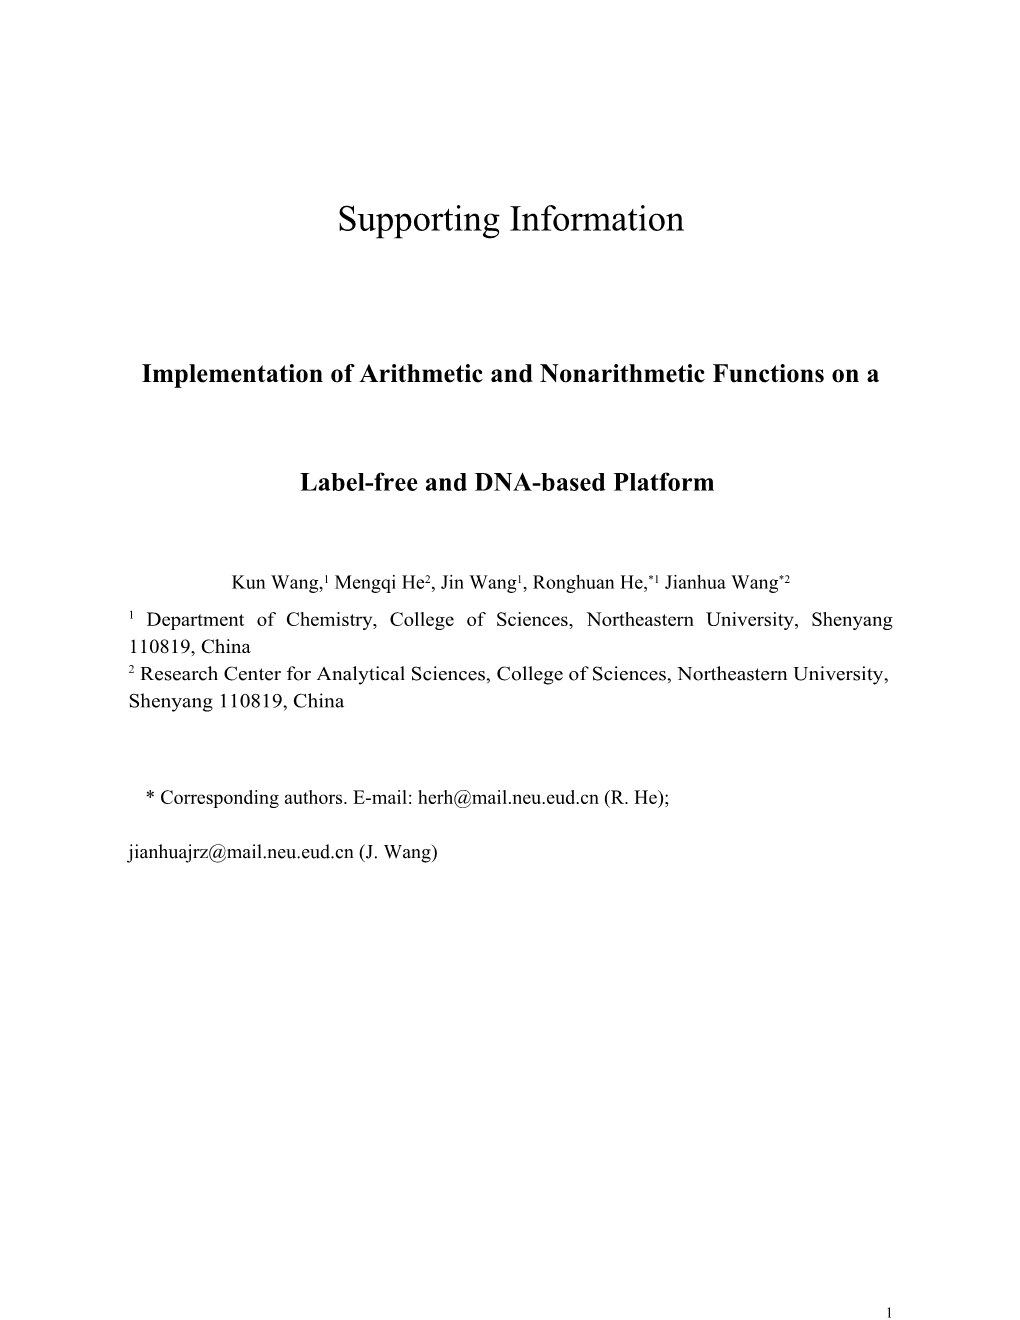 Implementation of Arithmetic and Nonarithmetic Functions on a Label-Free and DNA-Based